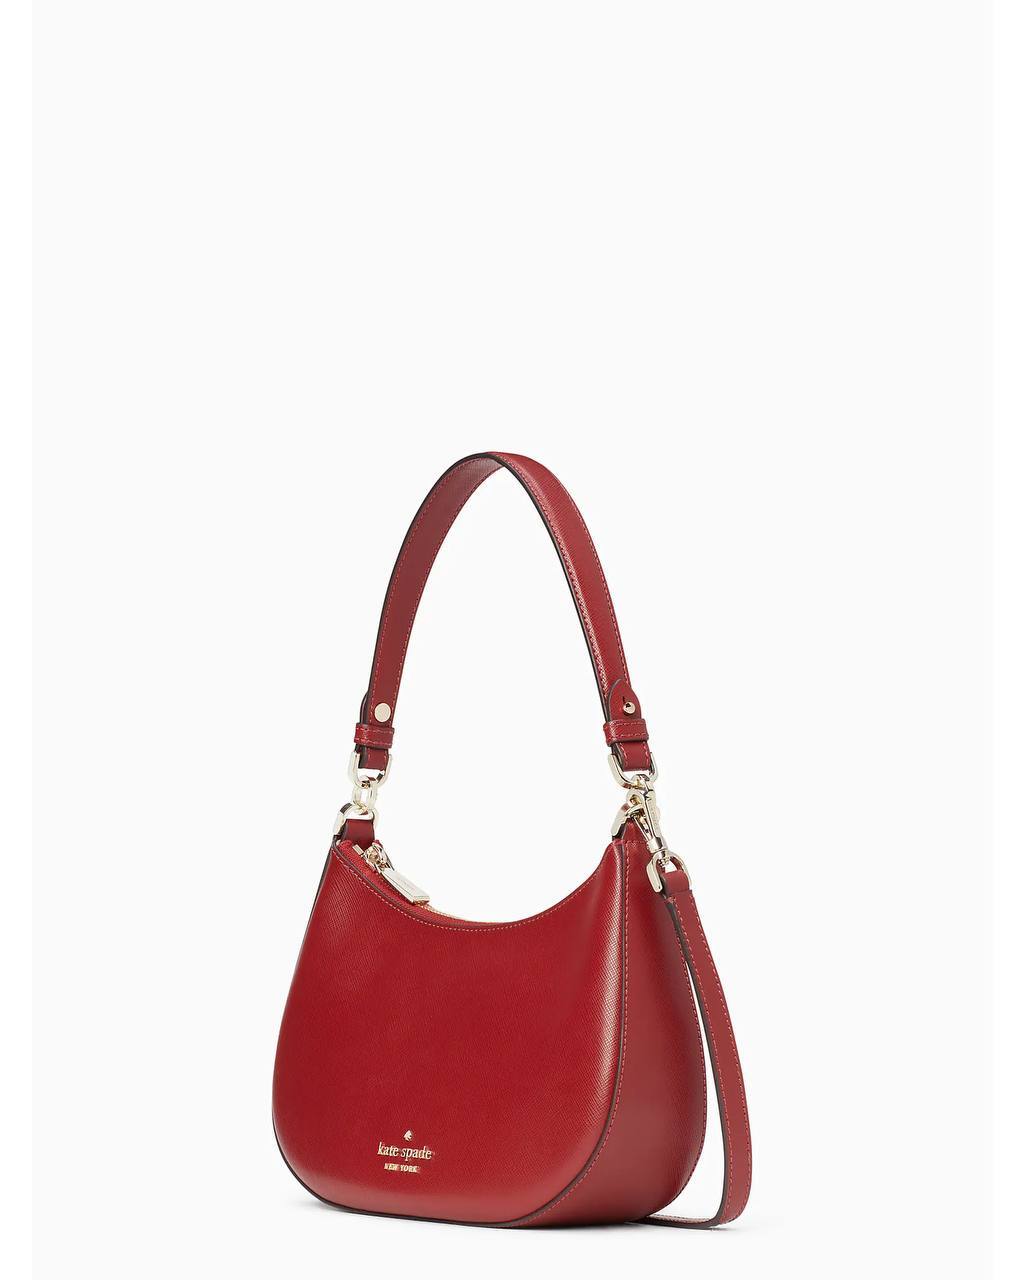 Kate Spade Staci Crossbody in Red Currant – Exclusively USA